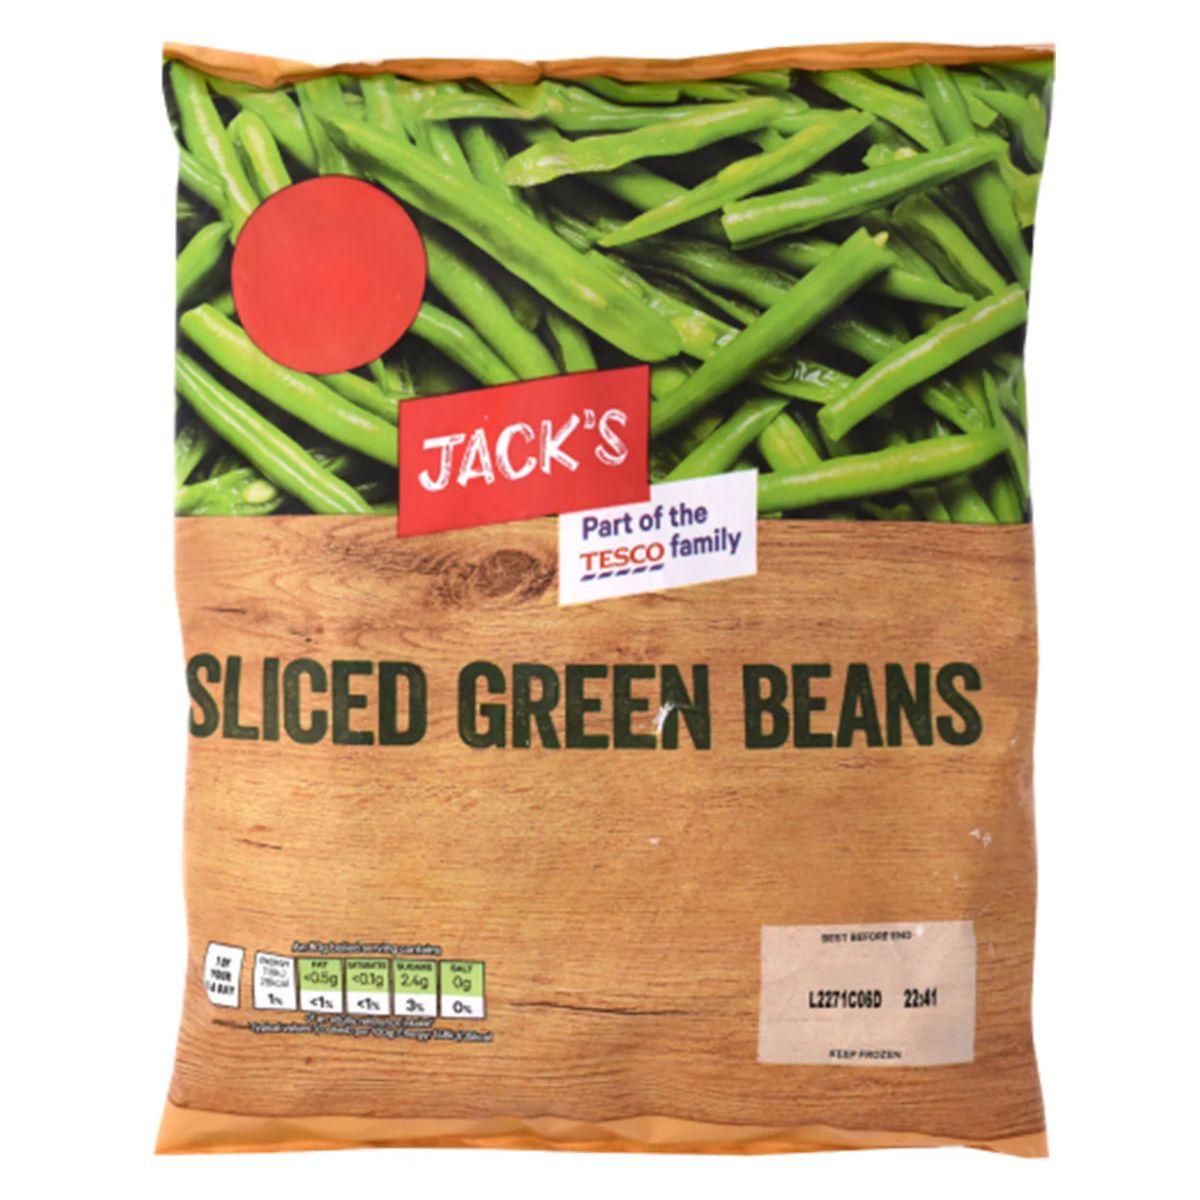 A bag of Jacks - Sliced Green Beans - 500g with nutritional information, part of the tesco family, displayed on a wood-textured background.